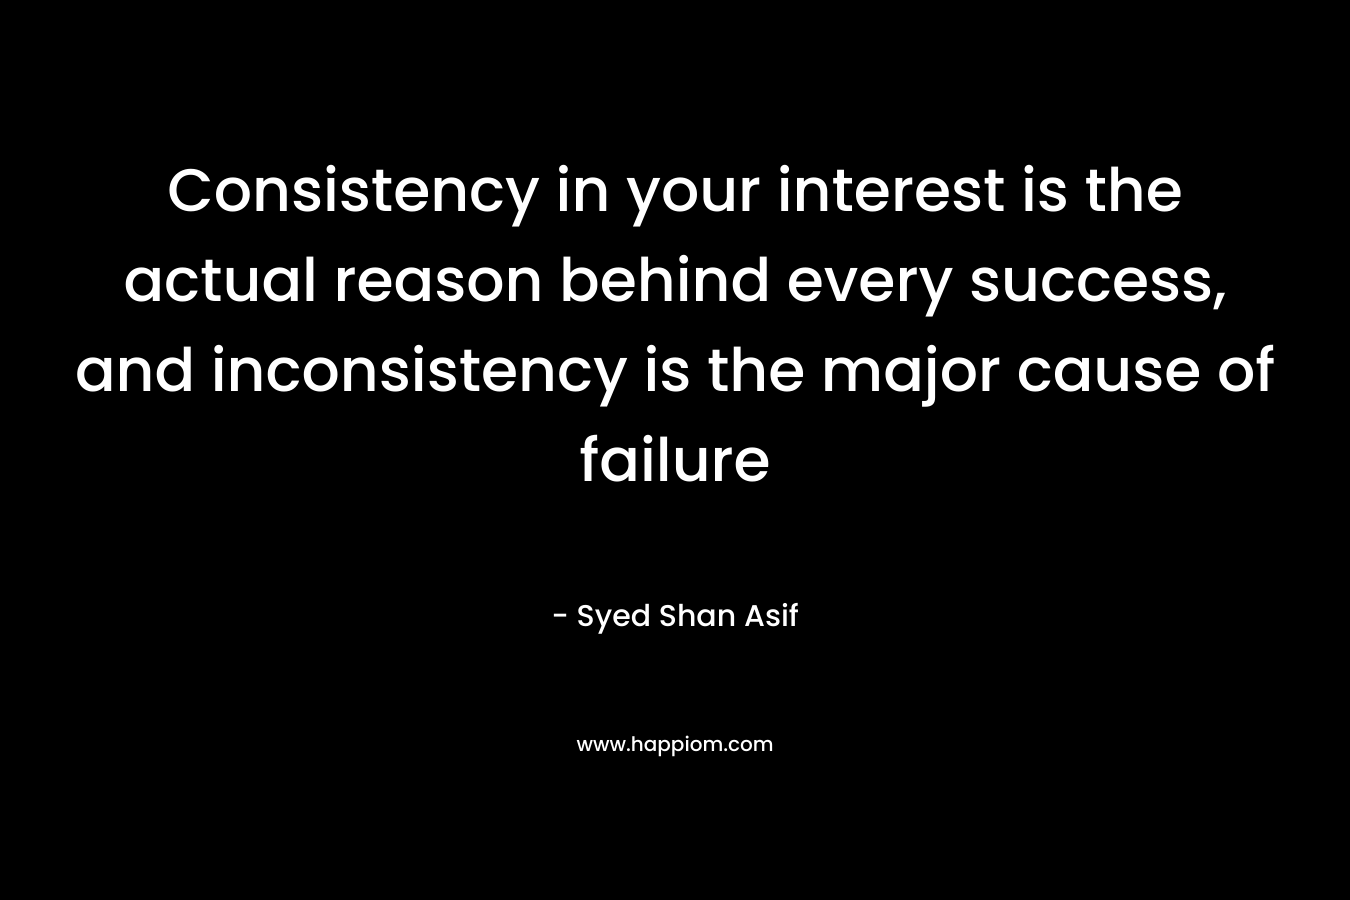 Consistency in your interest is the actual reason behind every success, and inconsistency is the major cause of failure